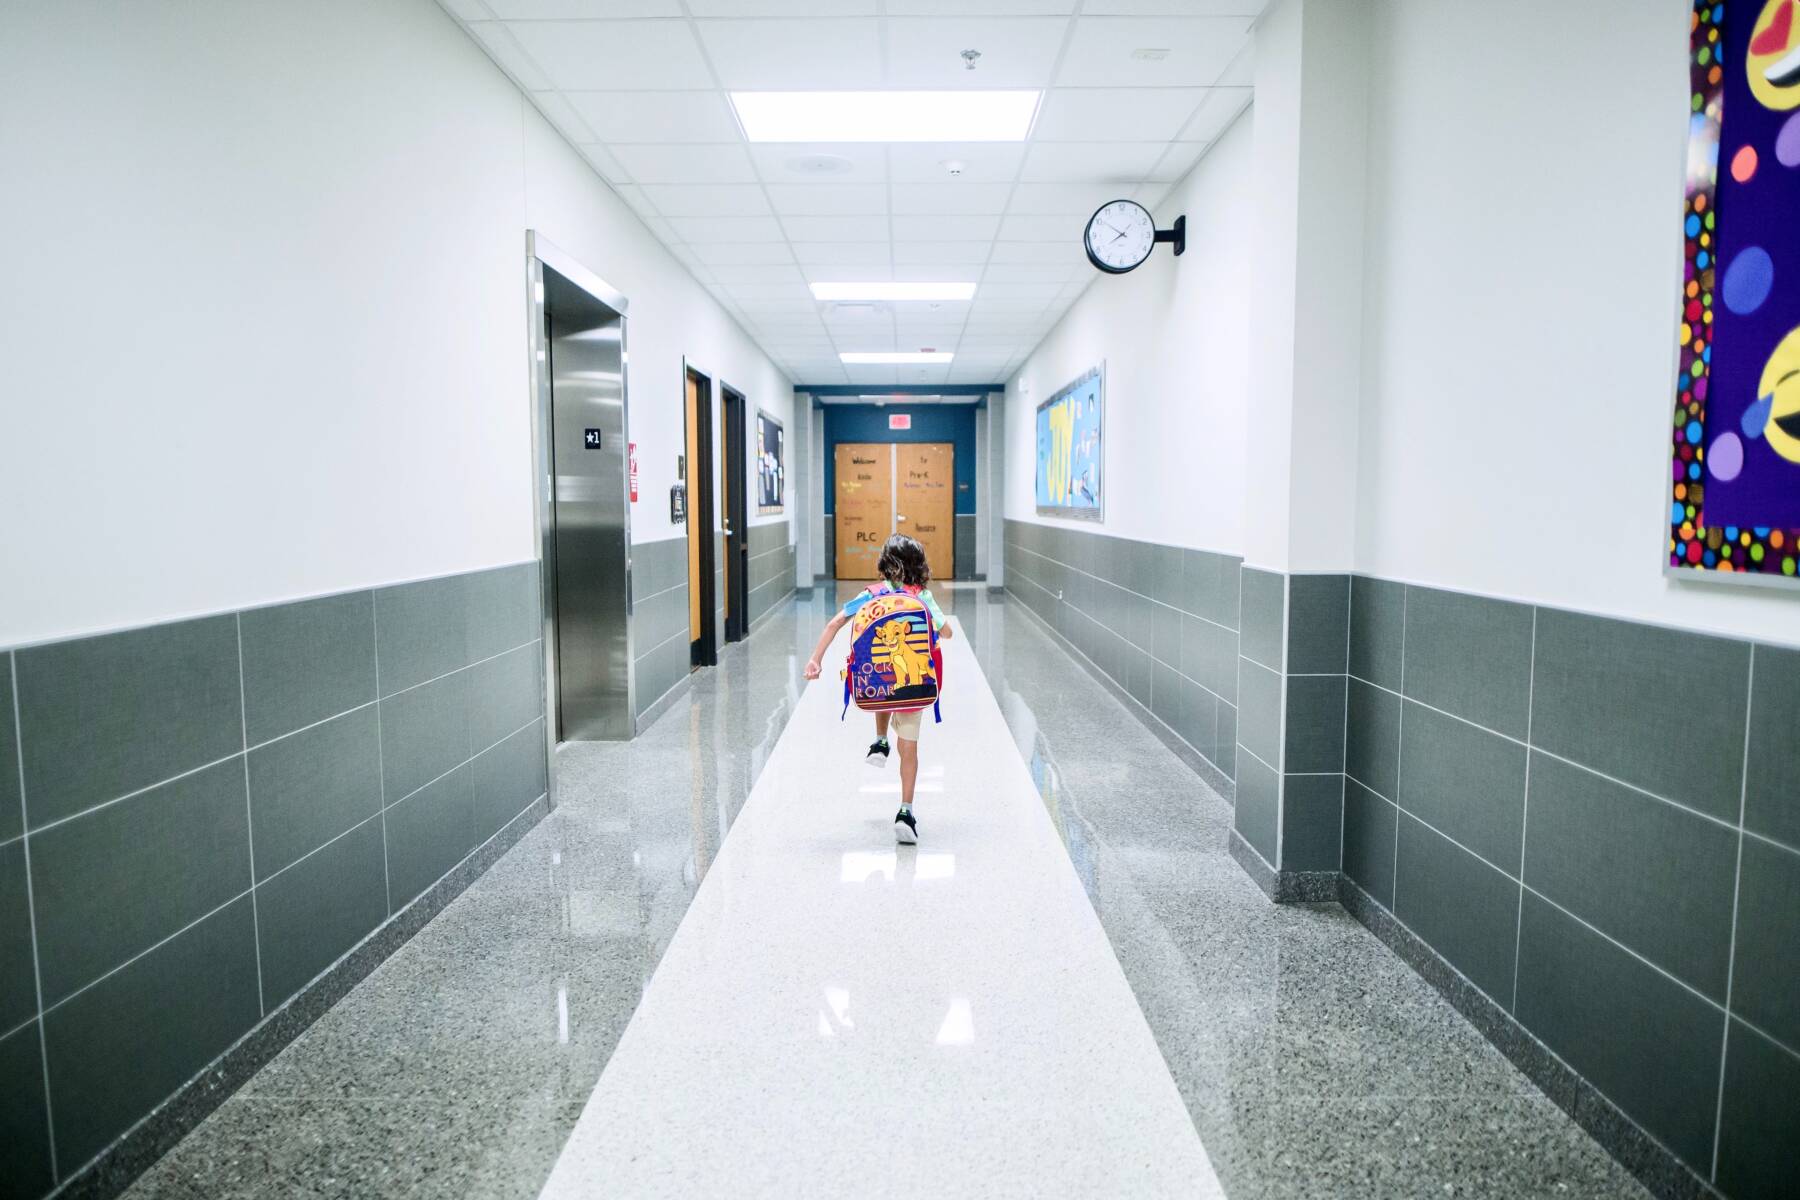 A school student walking the hallways that contain the contrast of dark gray and white marble flooring